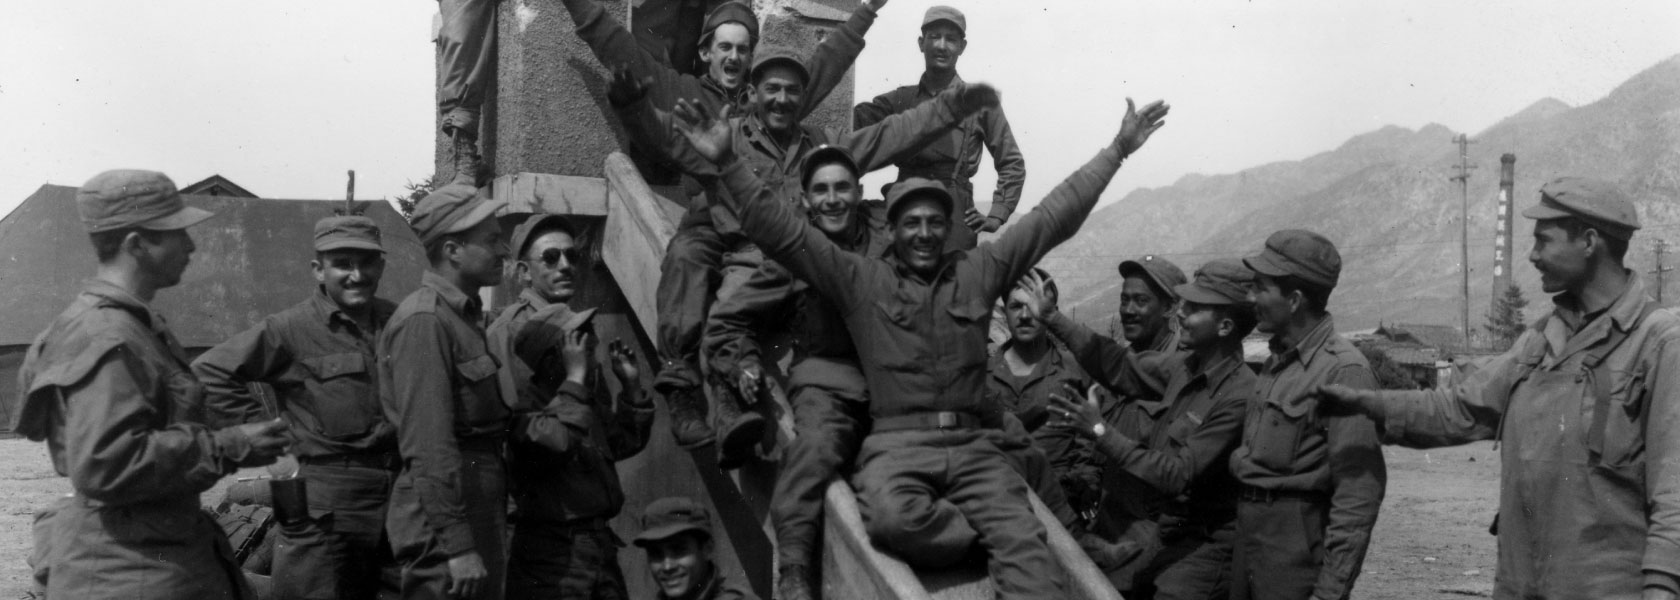 A group of Soldiers surround and sit on a playground slide. Their hands are upraised in celebration. 